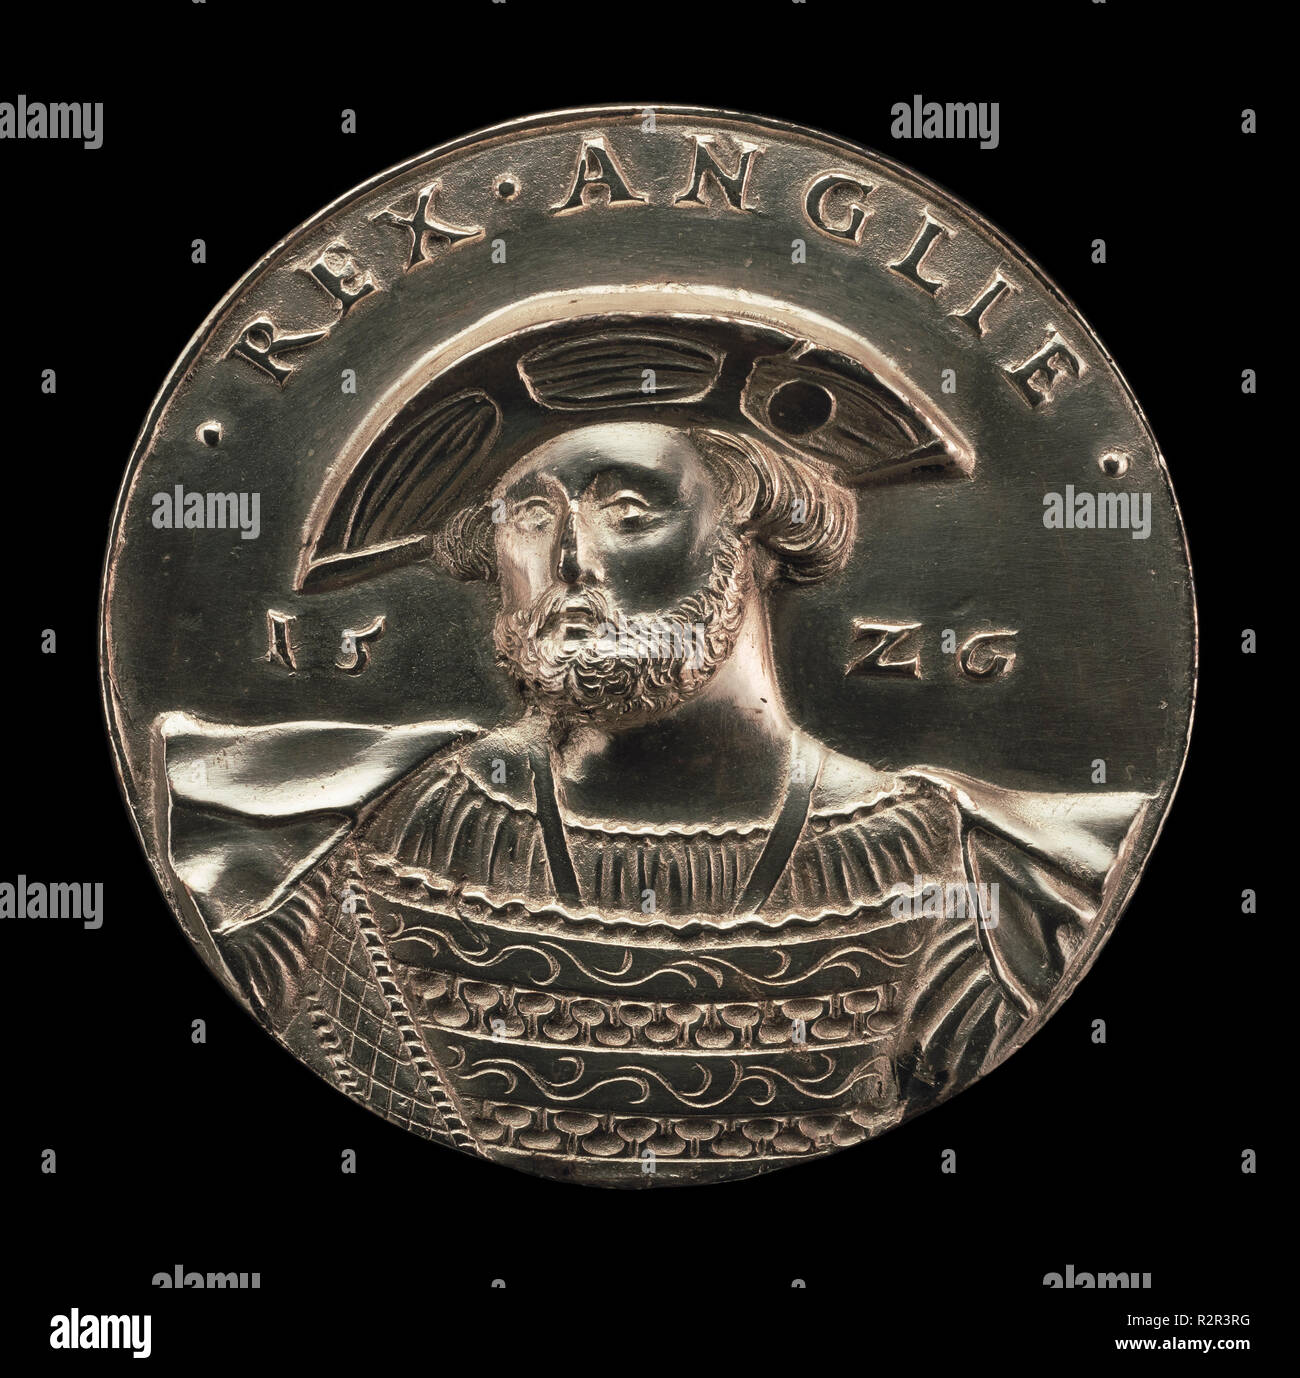 Henry VIII, 1491-1547, King of England 1509 [obverse]. Dated: 1526. Dimensions: overall (diameter): 5.93 cm (2 5/16 in.)  gross weight: 88.64 gr (0.195 lb.)  axis: 12:00. Medium: silver. Museum: National Gallery of Art, Washington DC. Author: HANS DAUCHER. Stock Photo